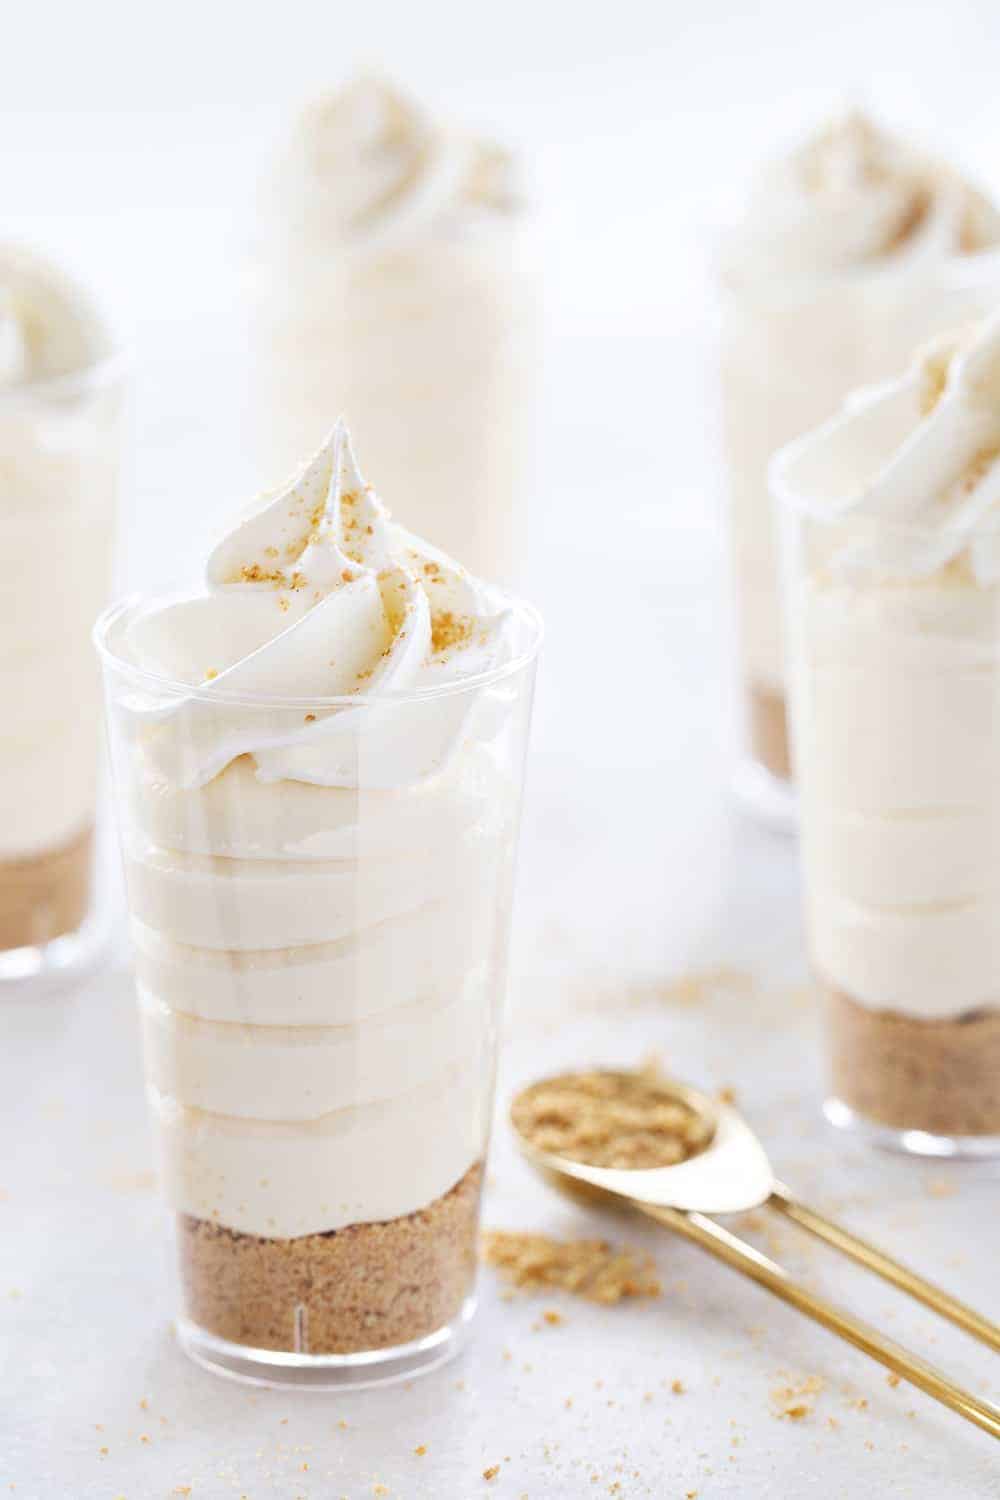 RumChata Cheesecake Pudding Shots are the perfect dessert shooter for just about any grown party. Simple and delicious!